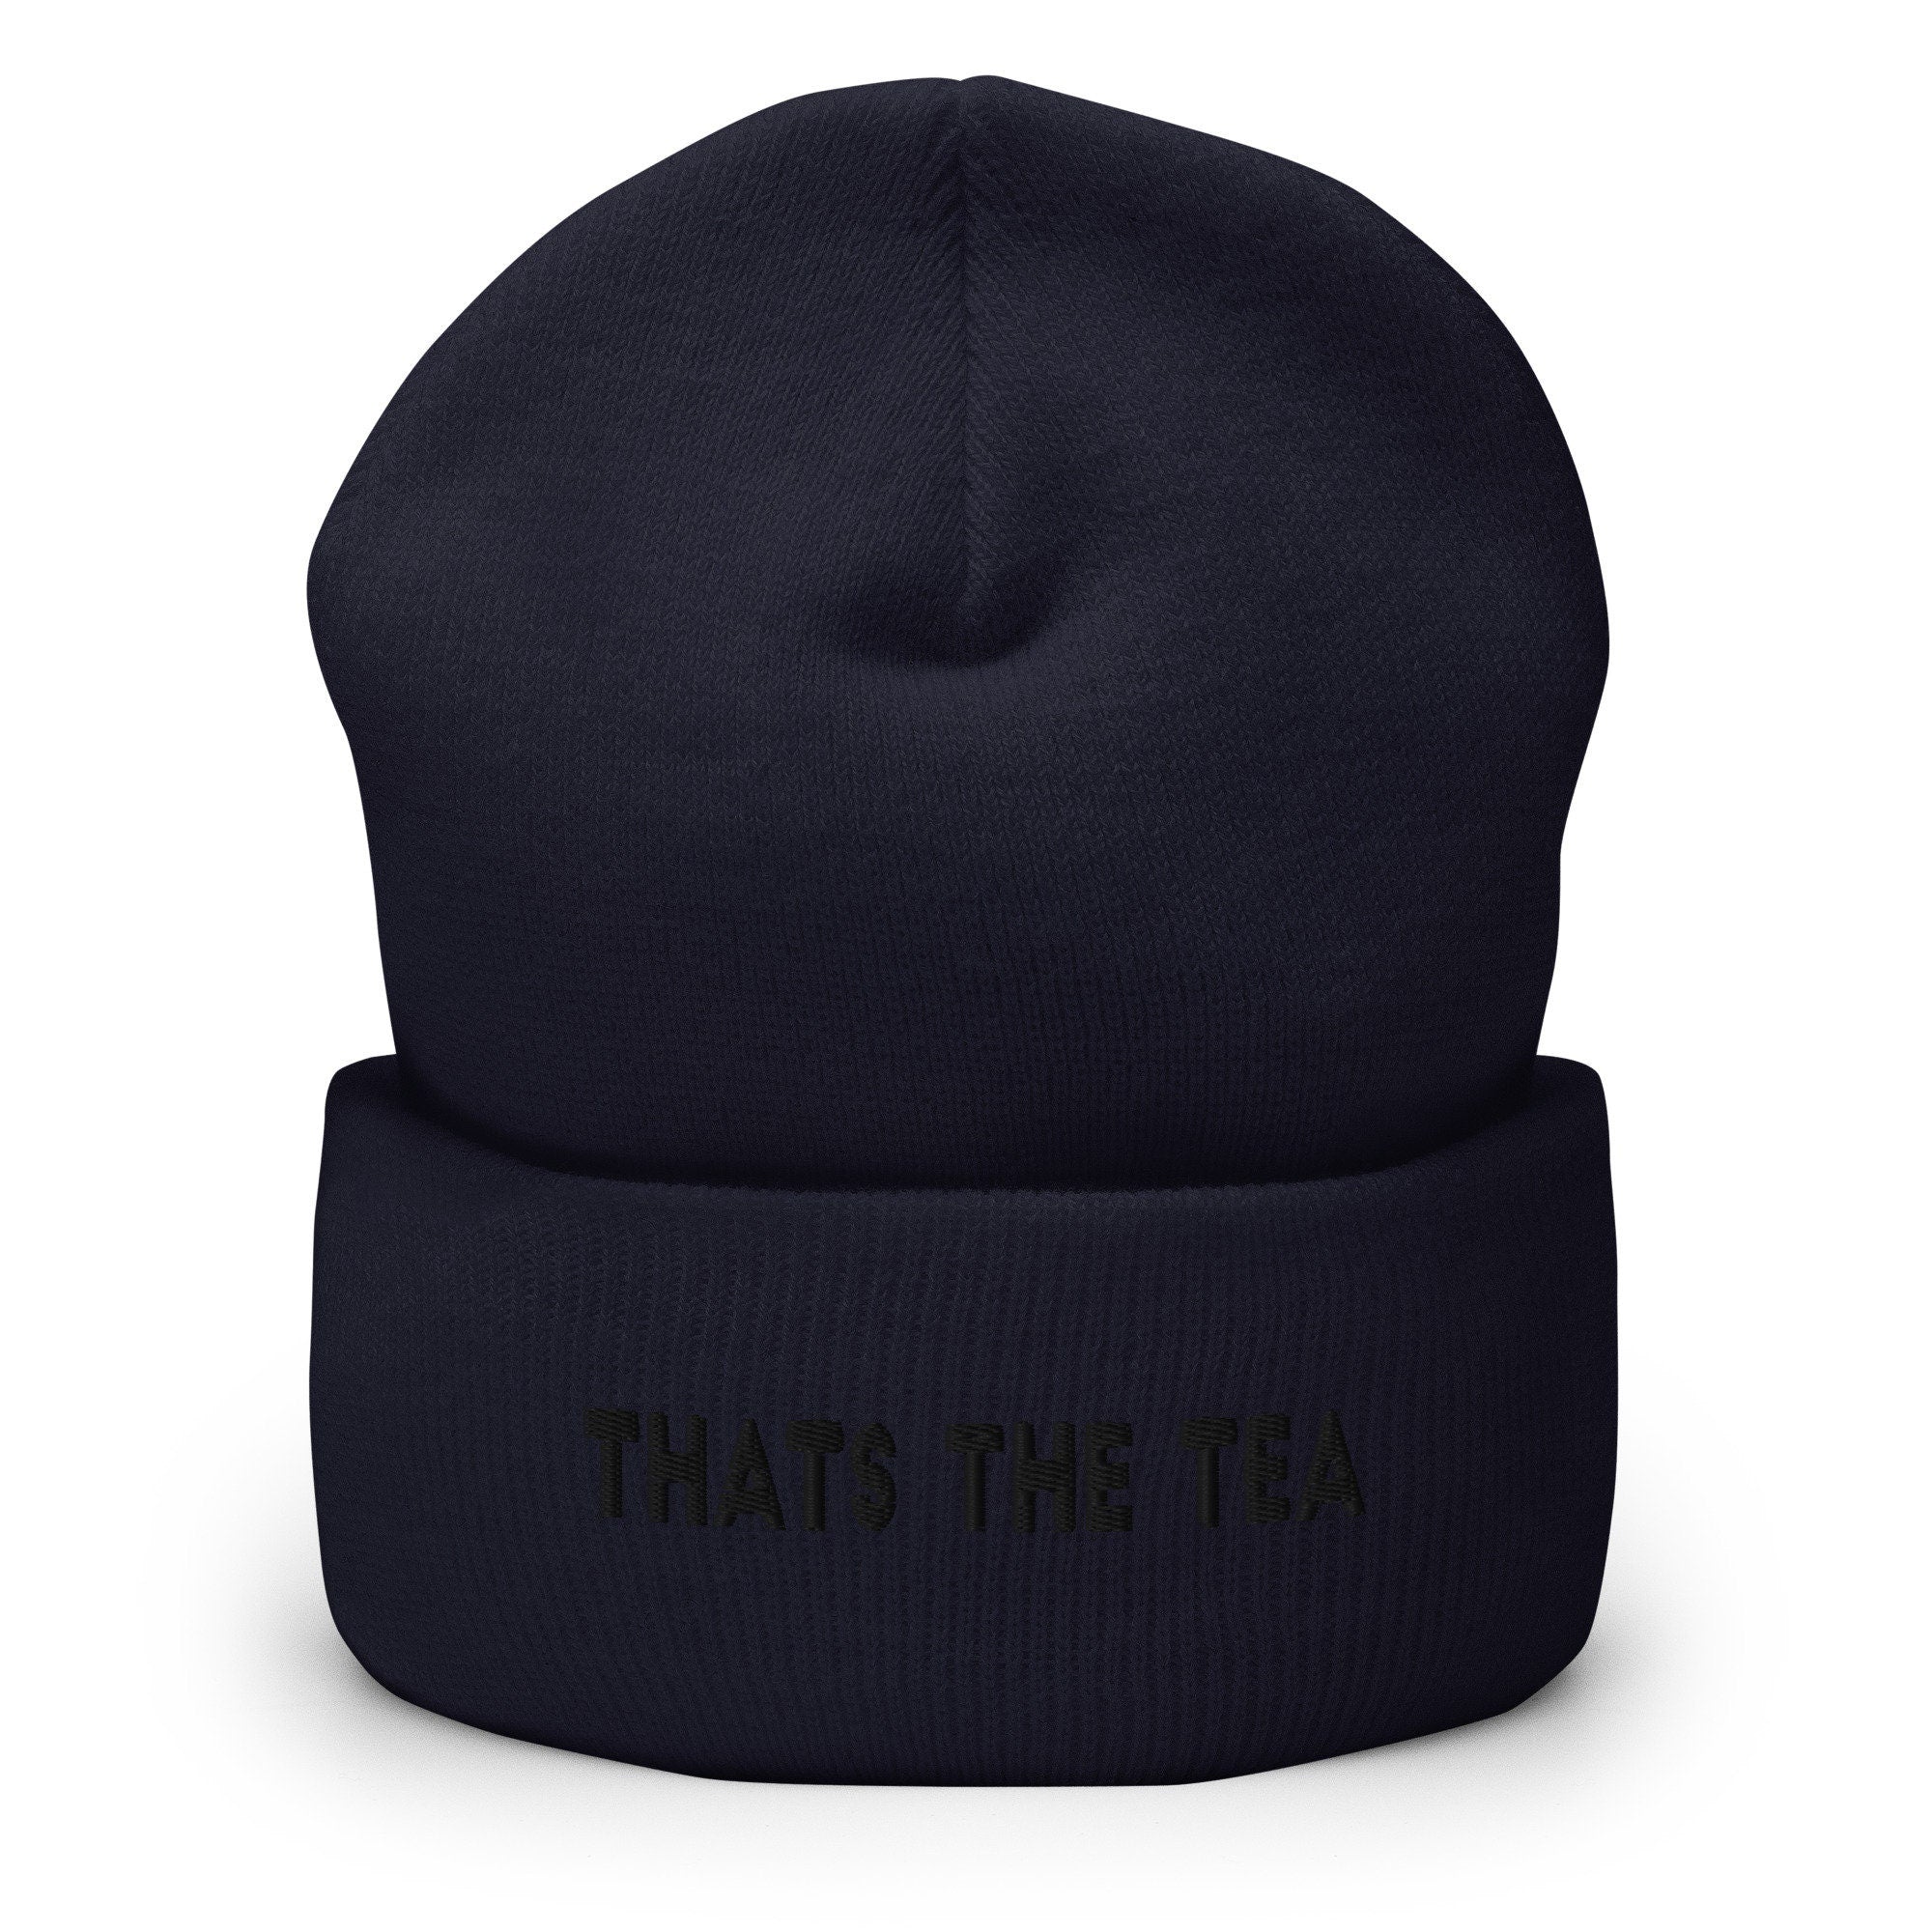 That's The Tea Embroidered Beanie, Handmade Cuffed Knit Unisex Slouchy Adult Winter Hat Cap Gift